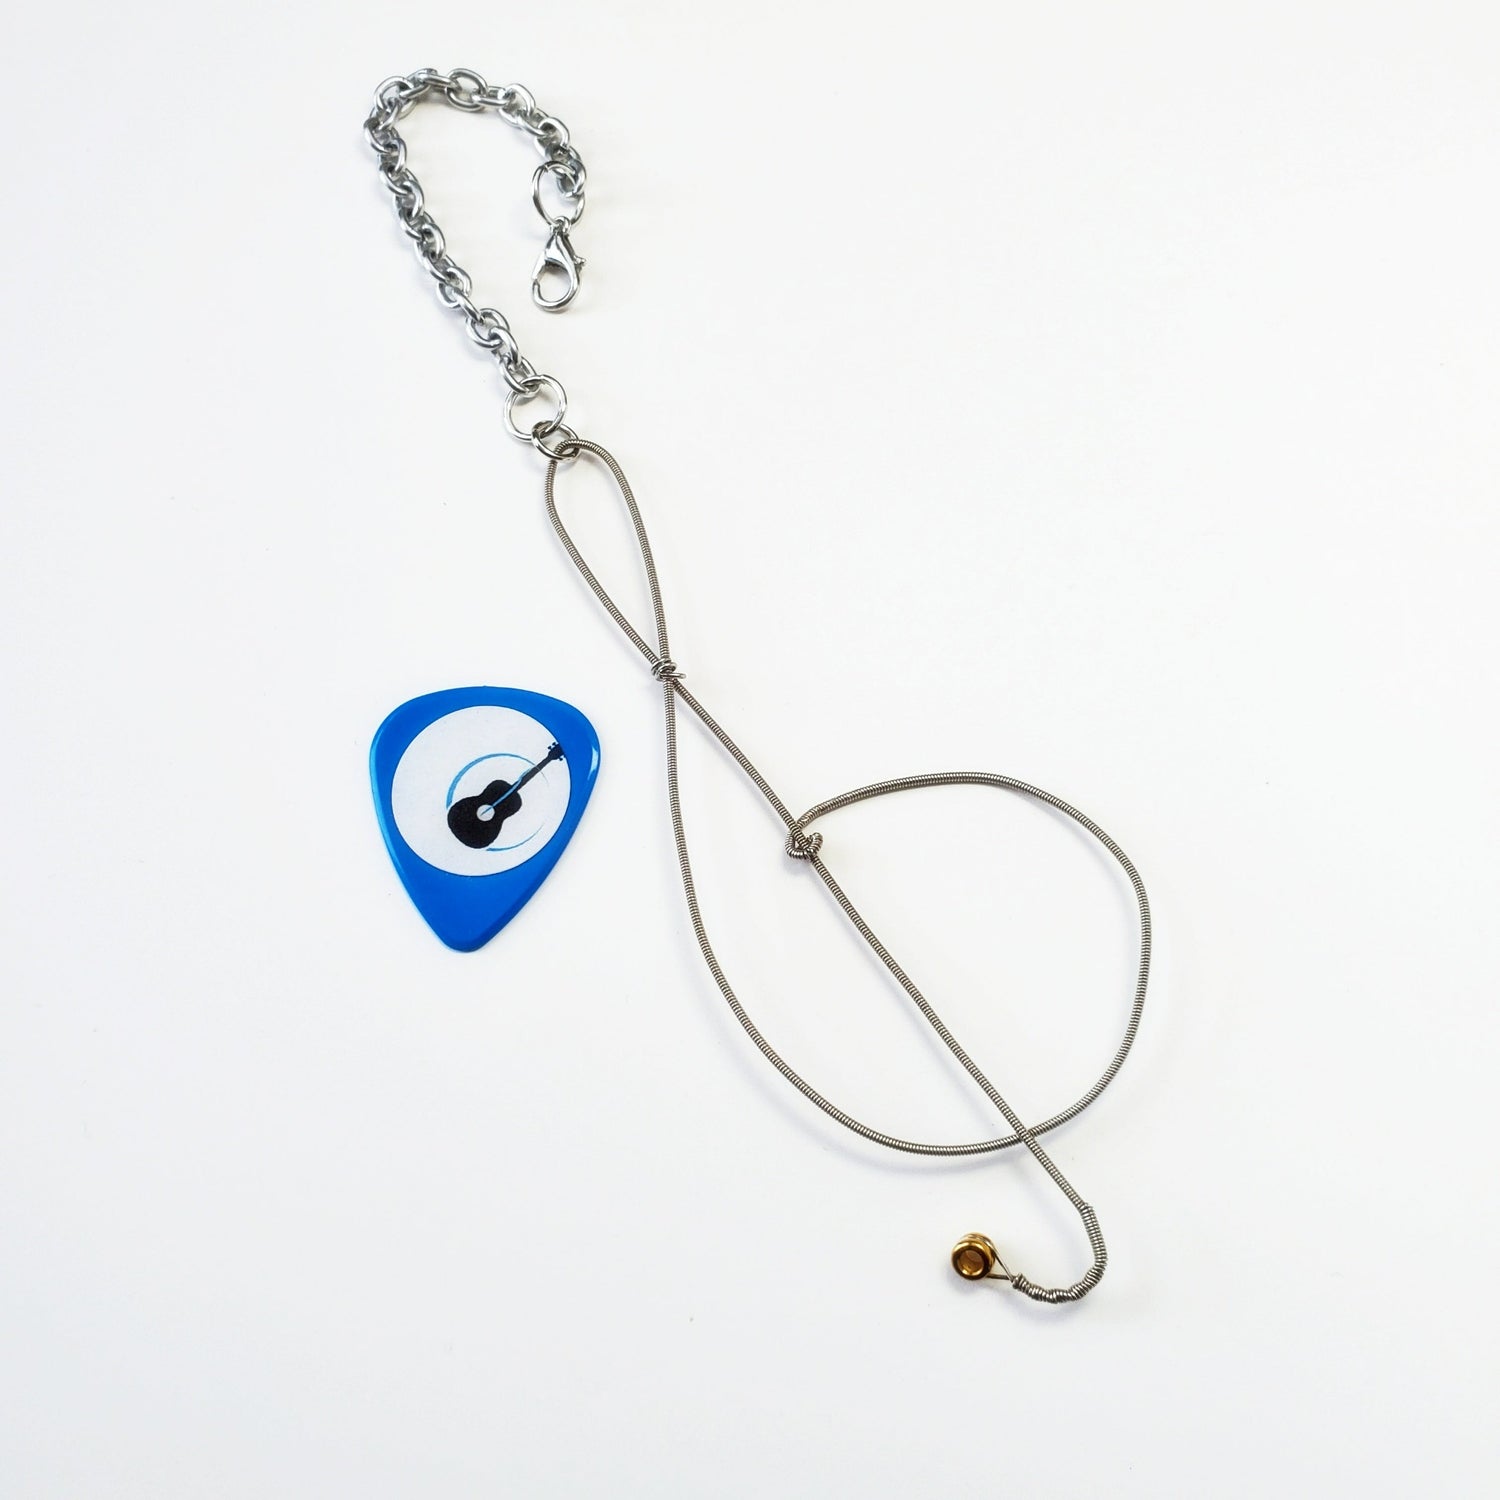 rearview mirror decoration in the shape of a treble clef, made from an upcycled guitar string- beside it is a blue guitar pick with an image of a black guitar